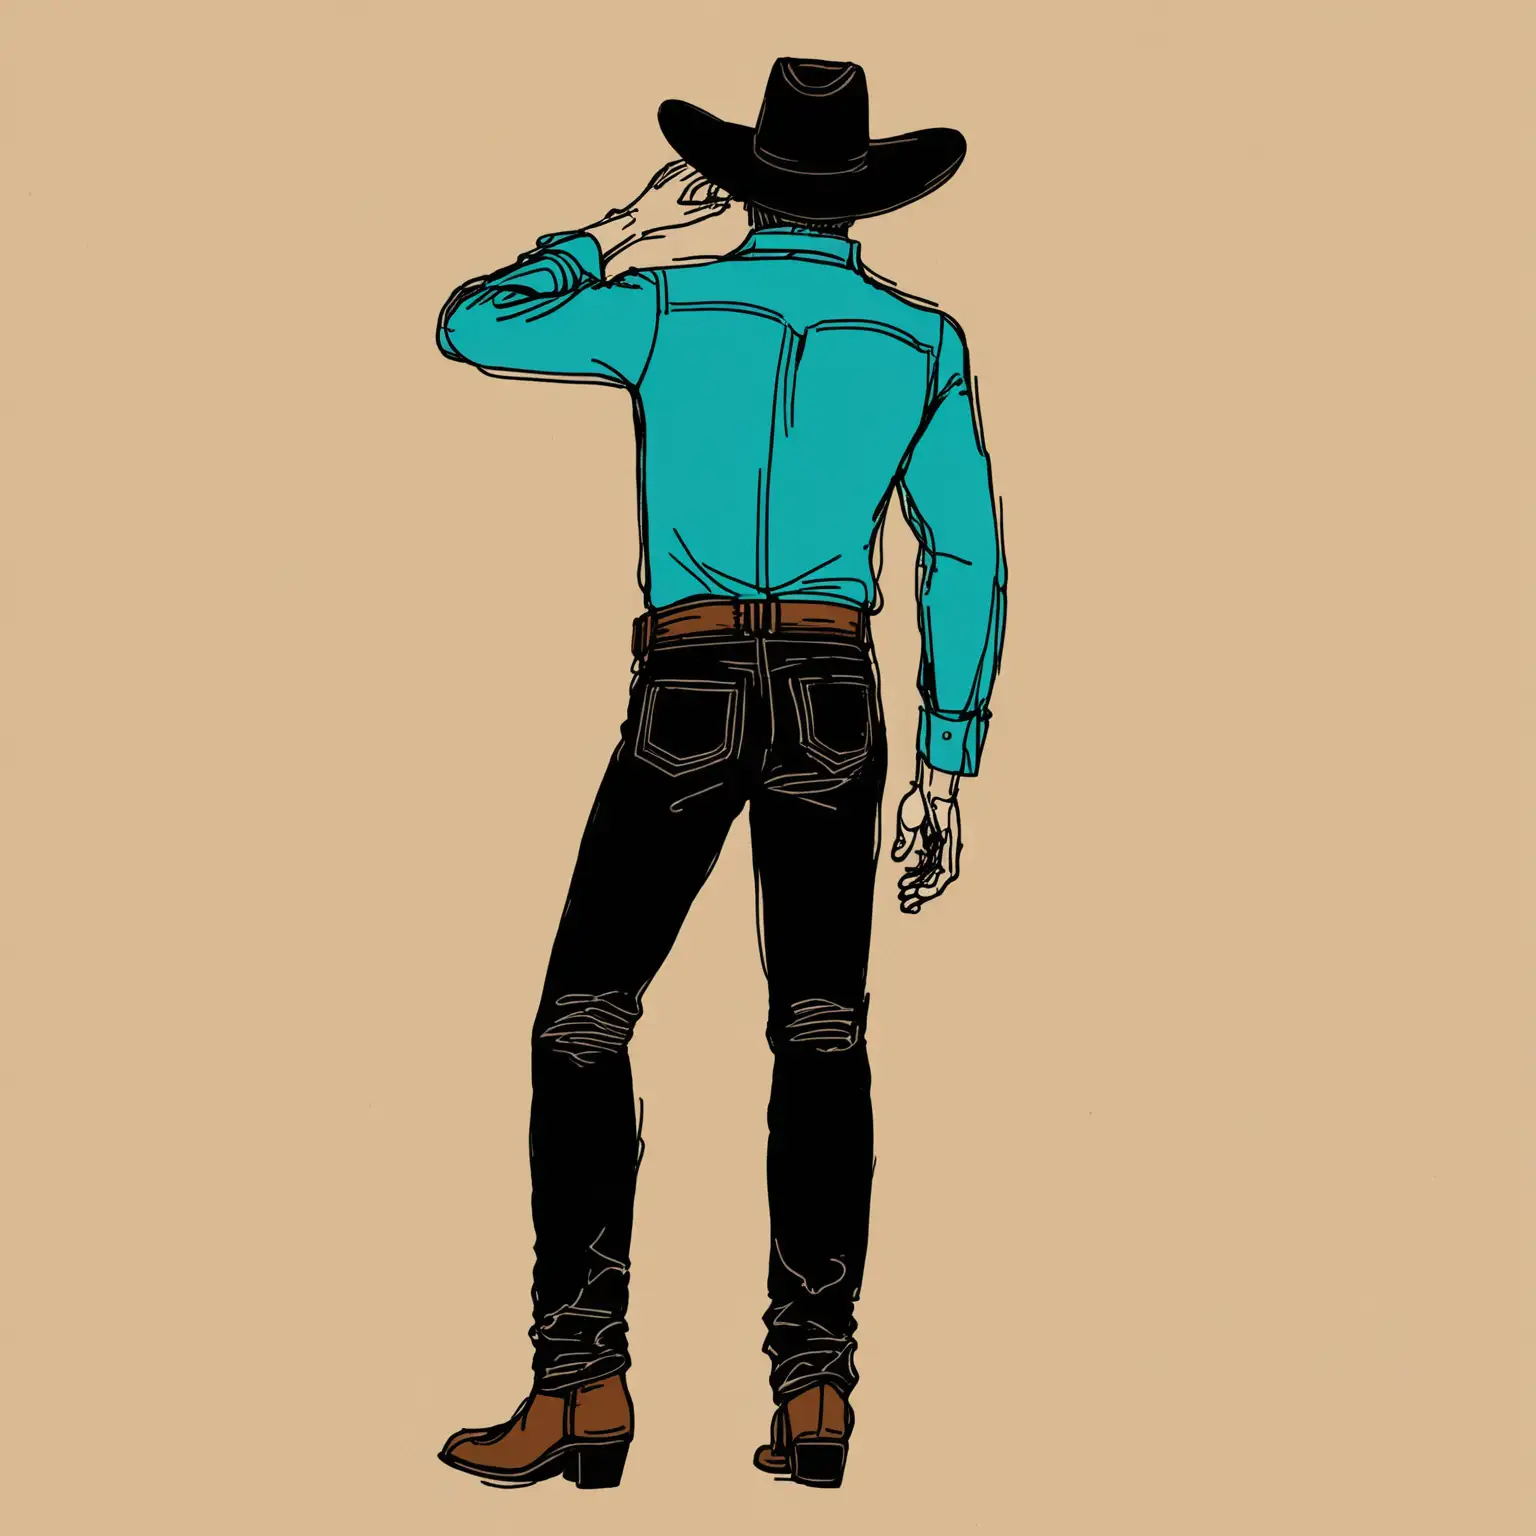 A line drawing of a cowboy with one hand holding a hat. He should be dressed in black pants with a teal shirt on. His cowboy had should be black. He has on brown boots. There are no details to his face.